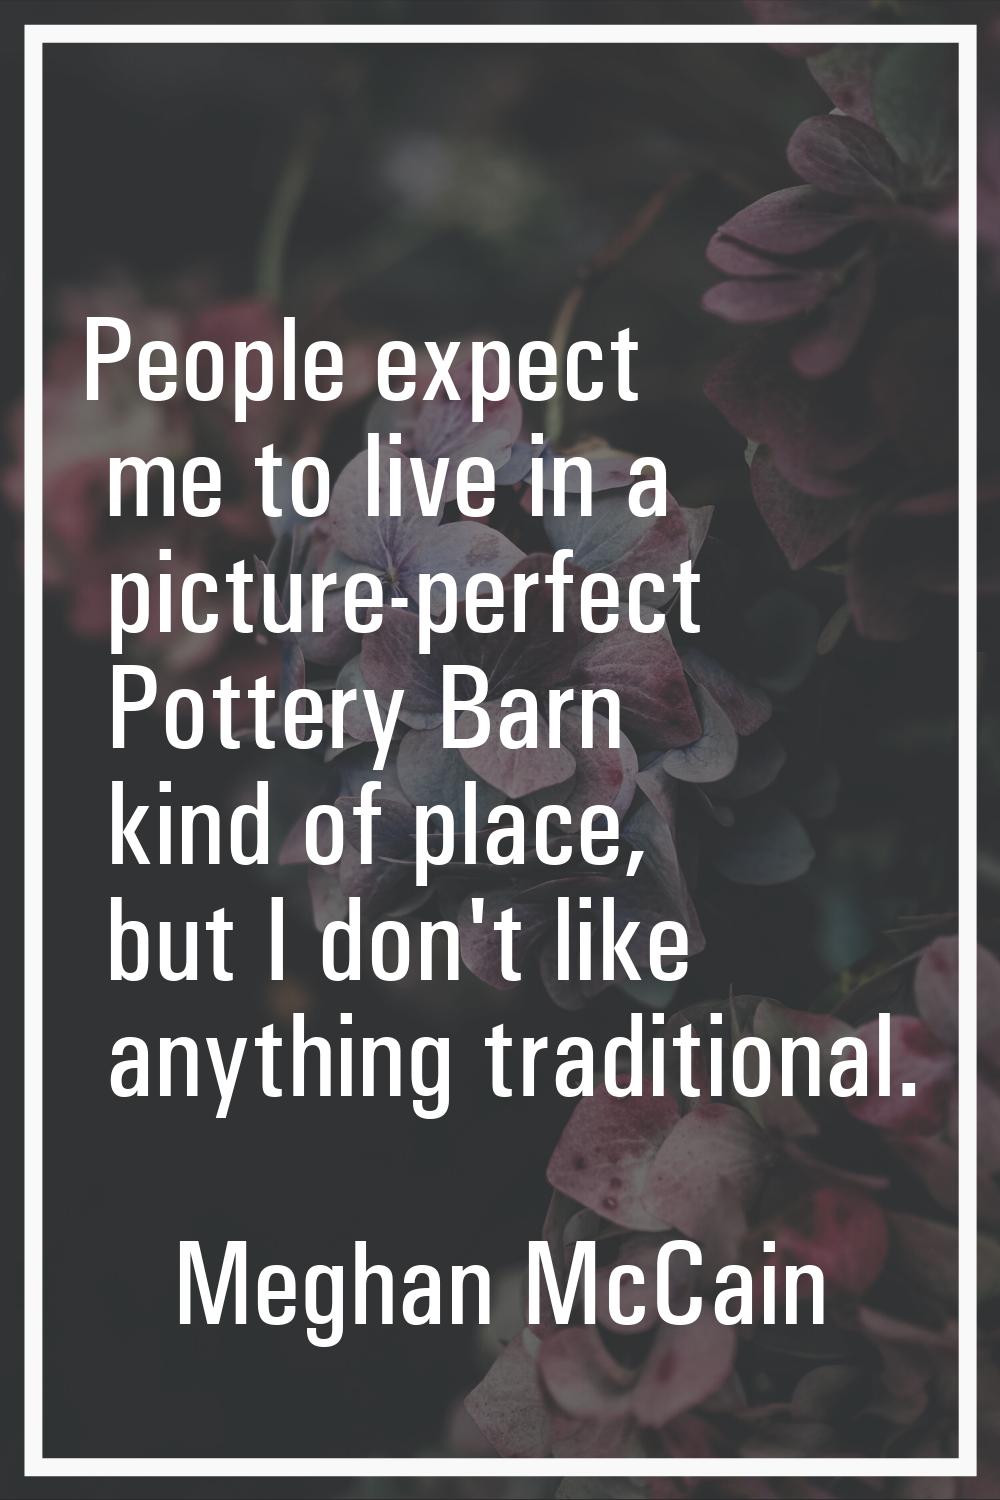 People expect me to live in a picture-perfect Pottery Barn kind of place, but I don't like anything